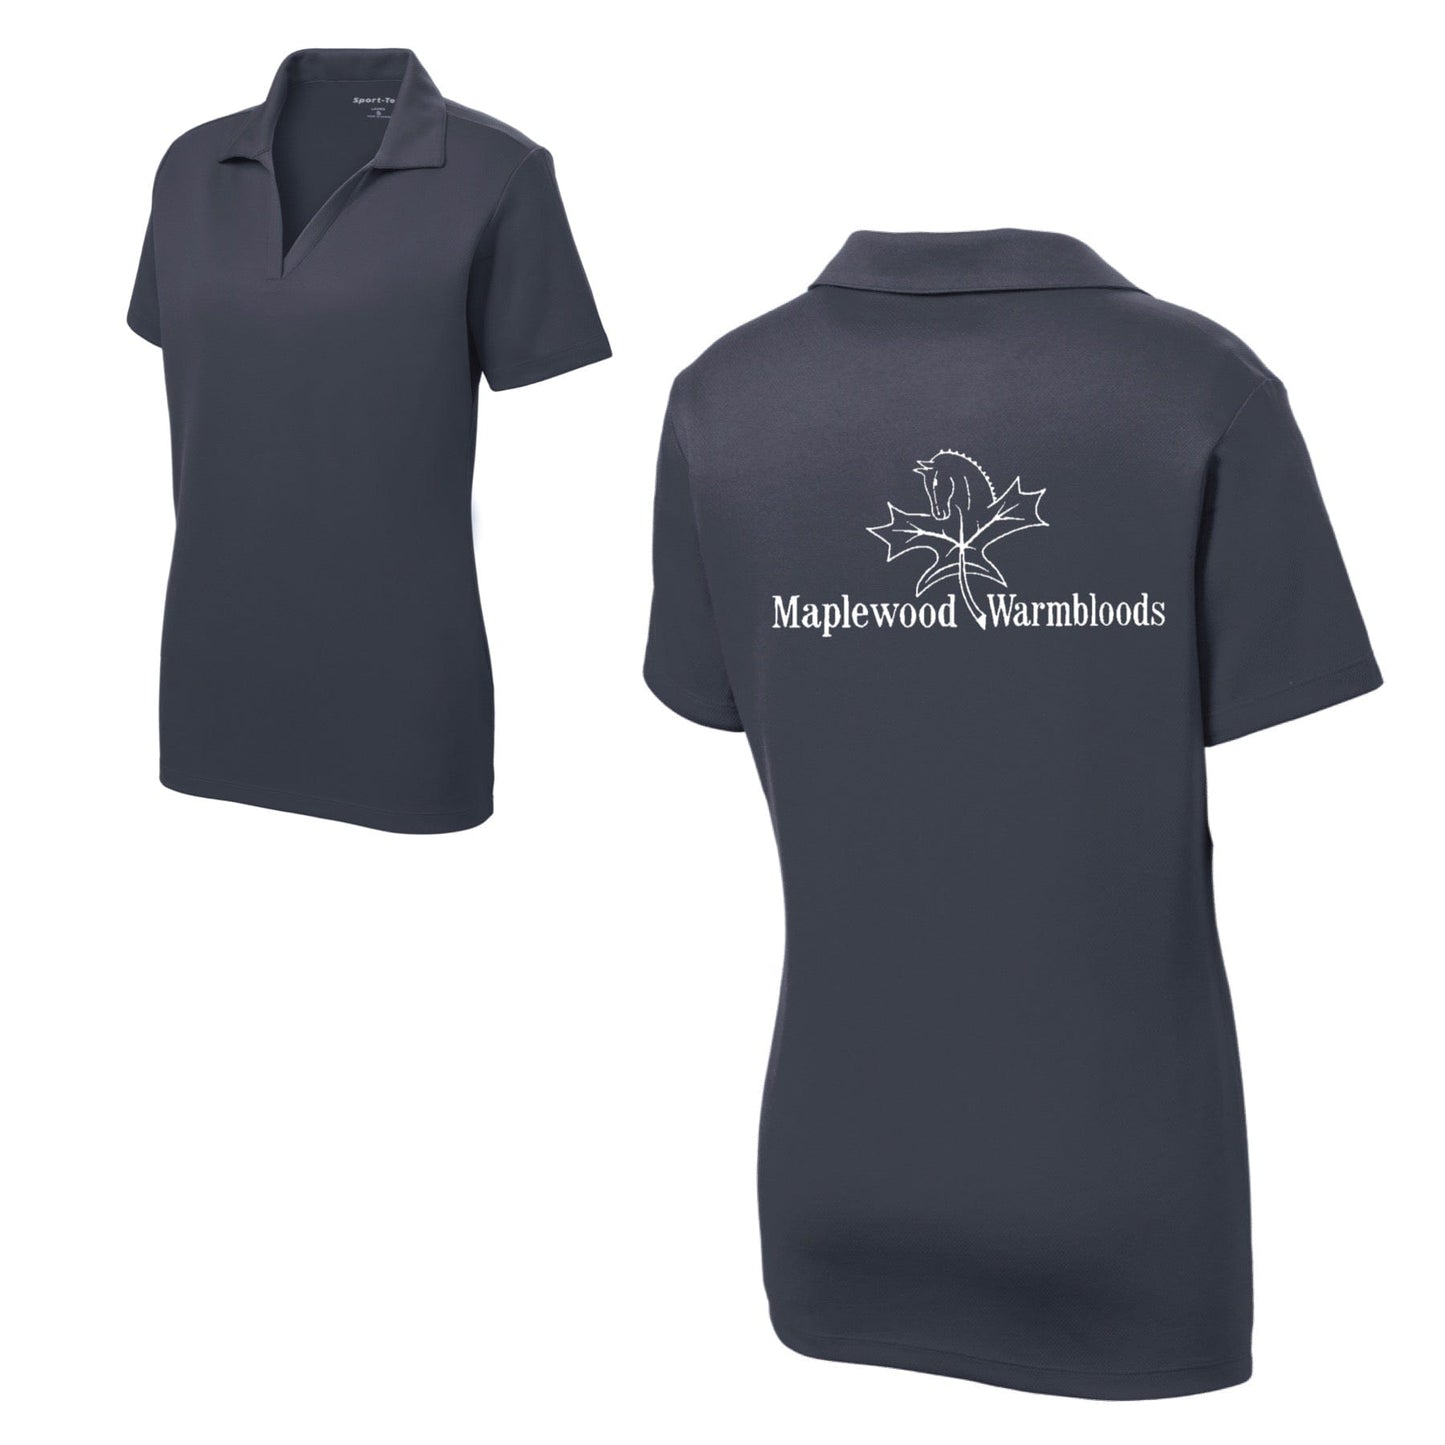 Equestrian Team Apparel Maplewood Warmbloods Polo equestrian team apparel online tack store mobile tack store custom farm apparel custom show stable clothing equestrian lifestyle horse show clothing riding clothes horses equestrian tack store